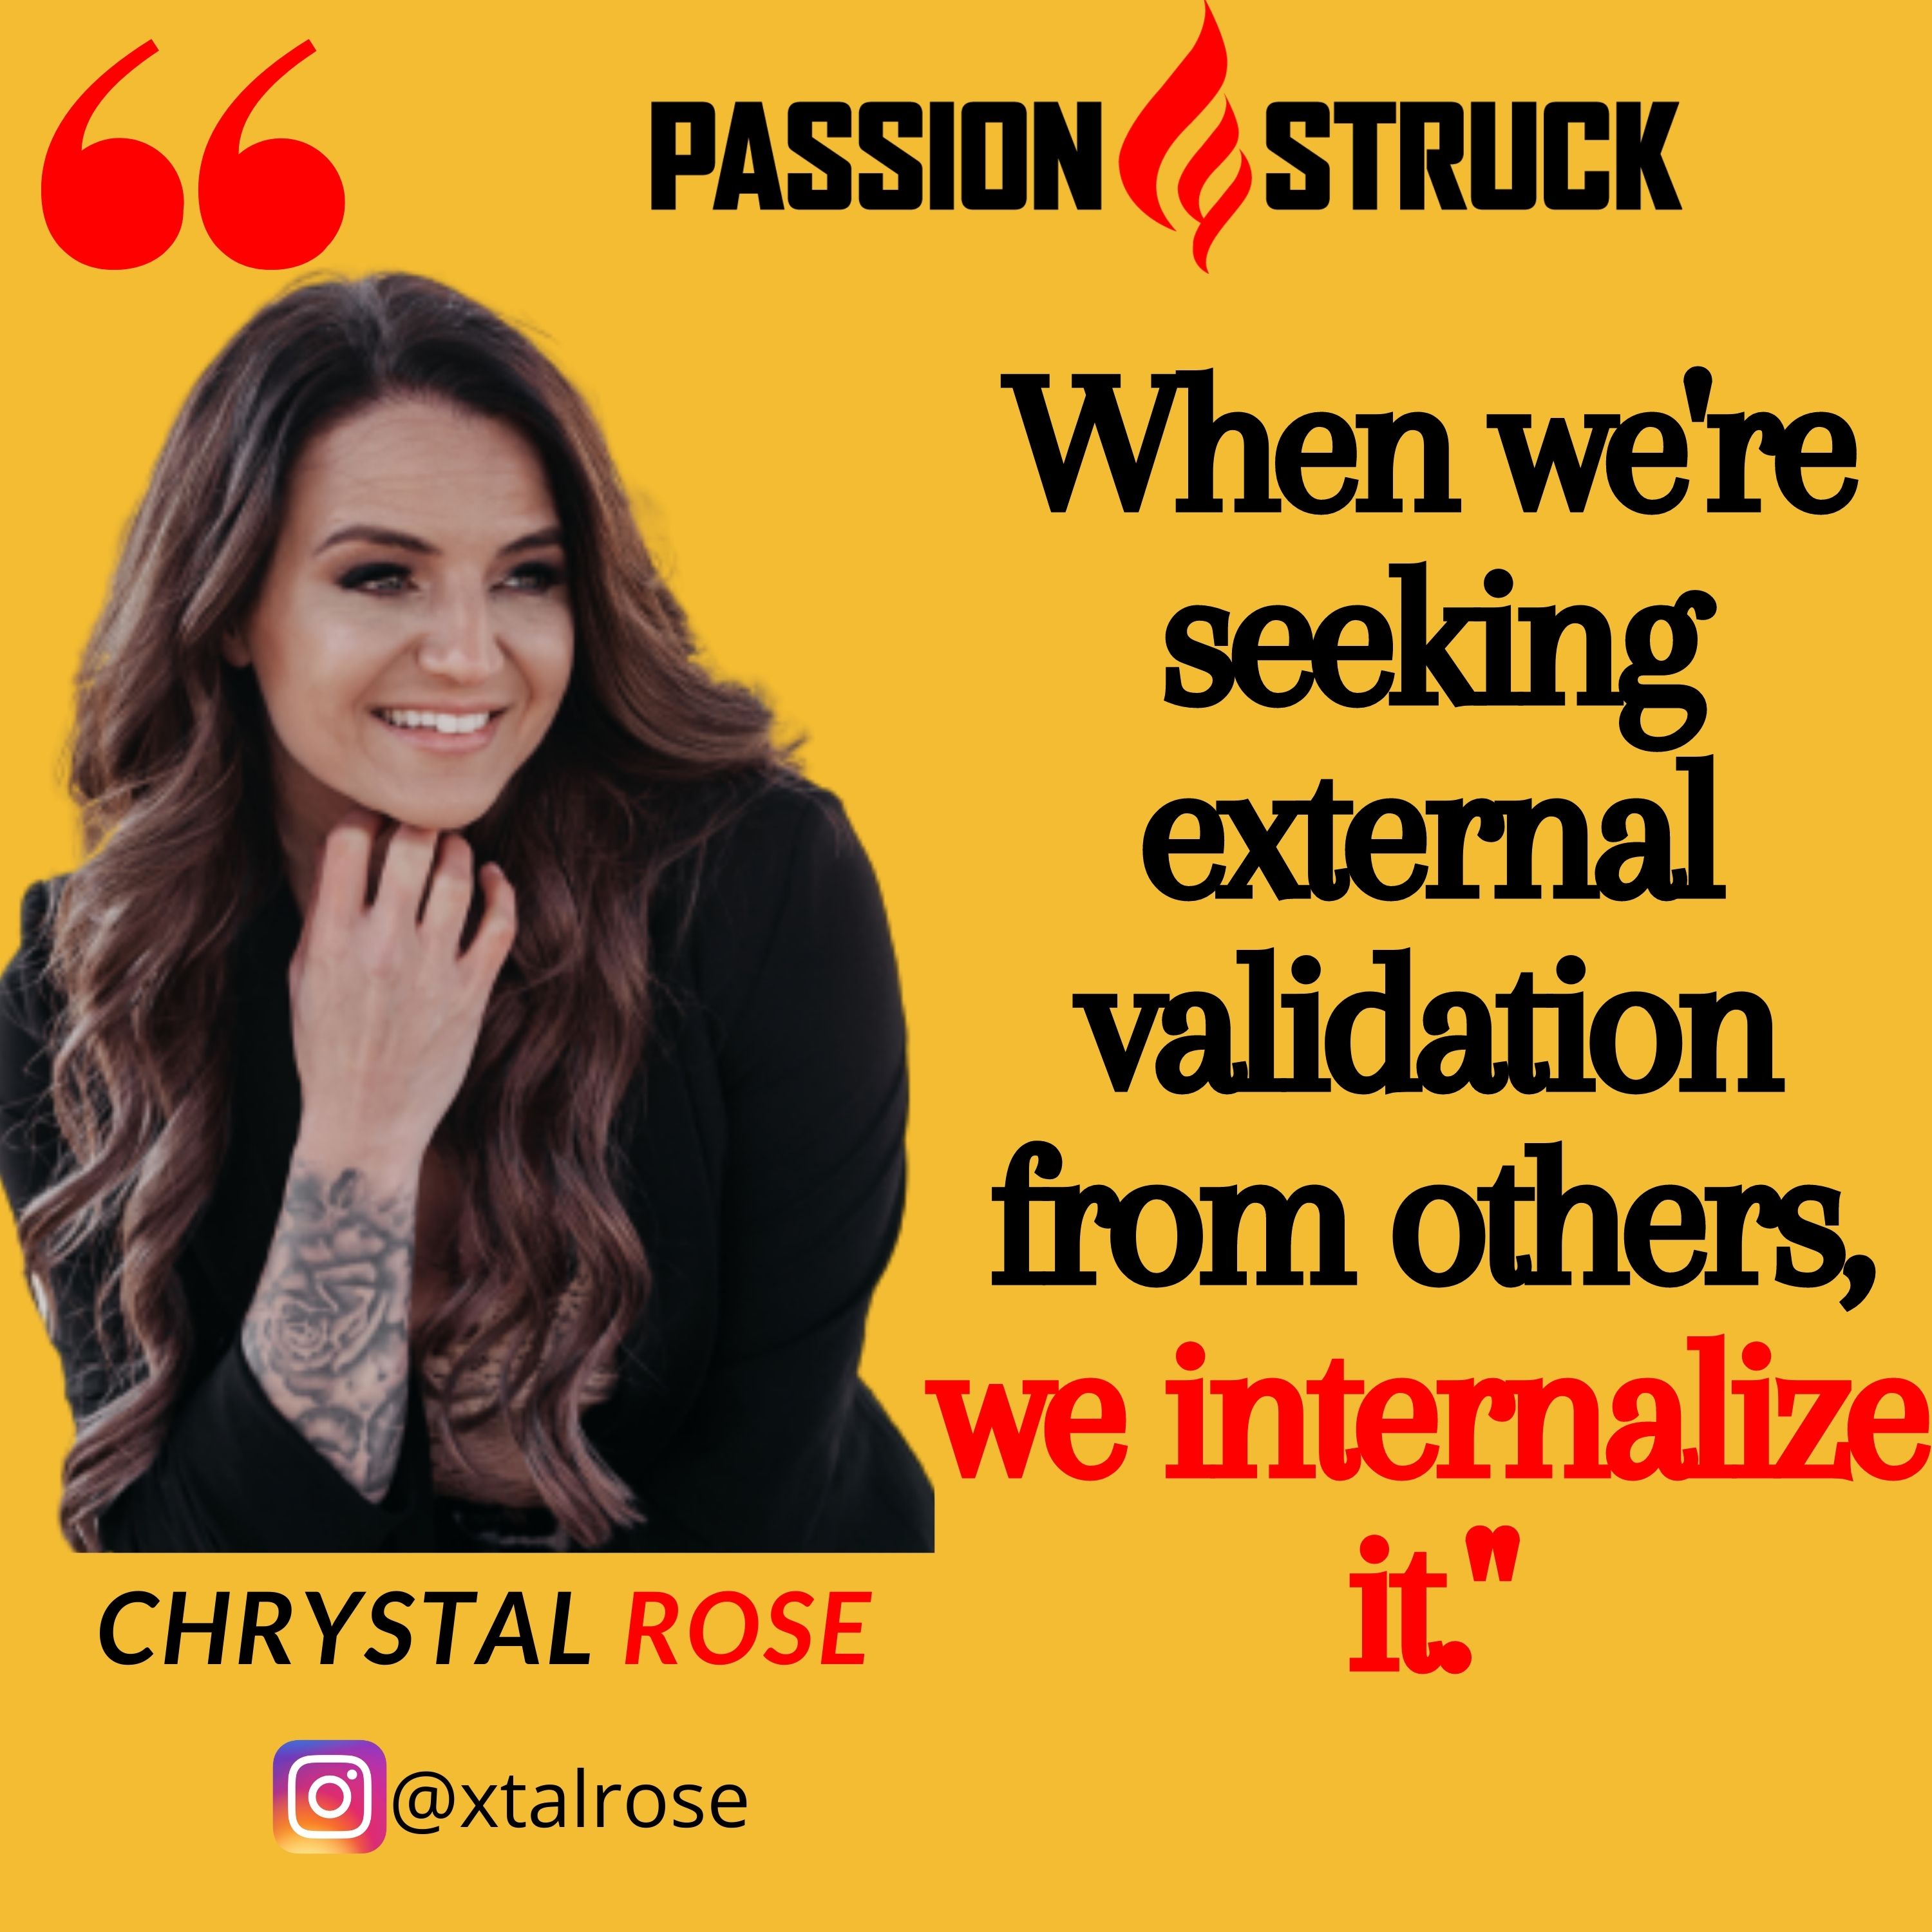 Quote from Chrystal Rose on the Passion Struck podcast about external validation